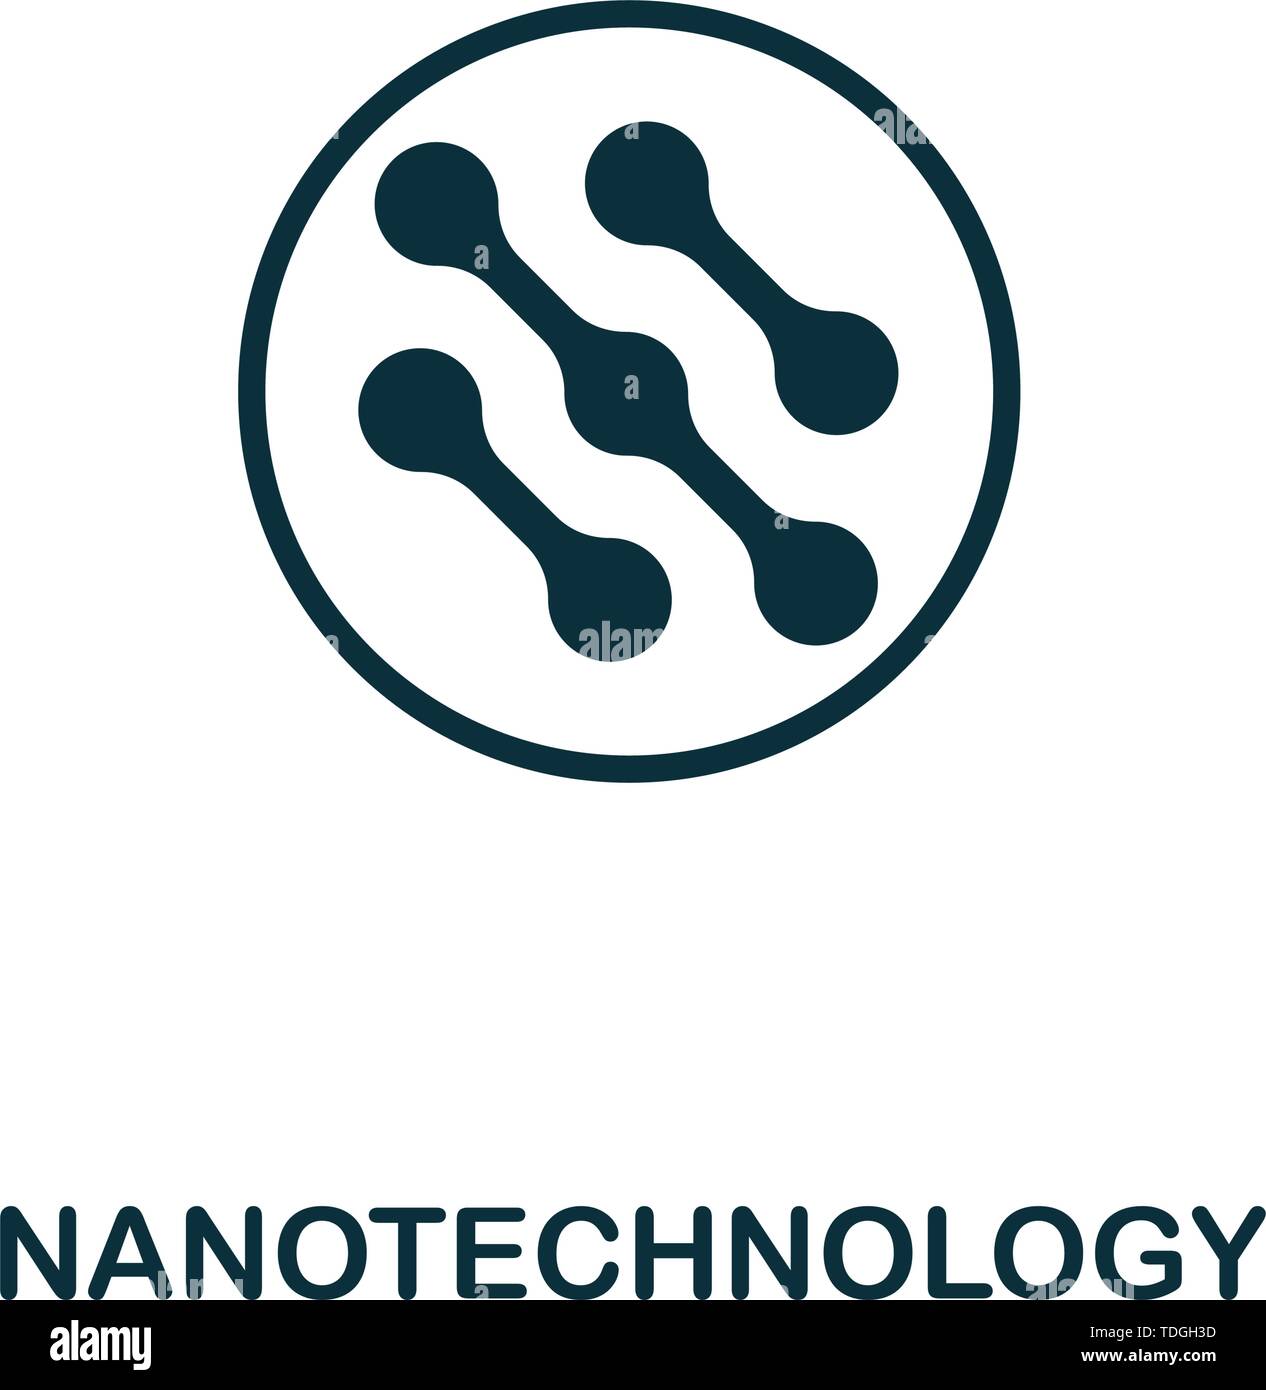 Nanotechnology vector icon symbol. Creative sign from biotechnology icons collection. Filled flat Nanotechnology icon for computer and mobile Stock Vector